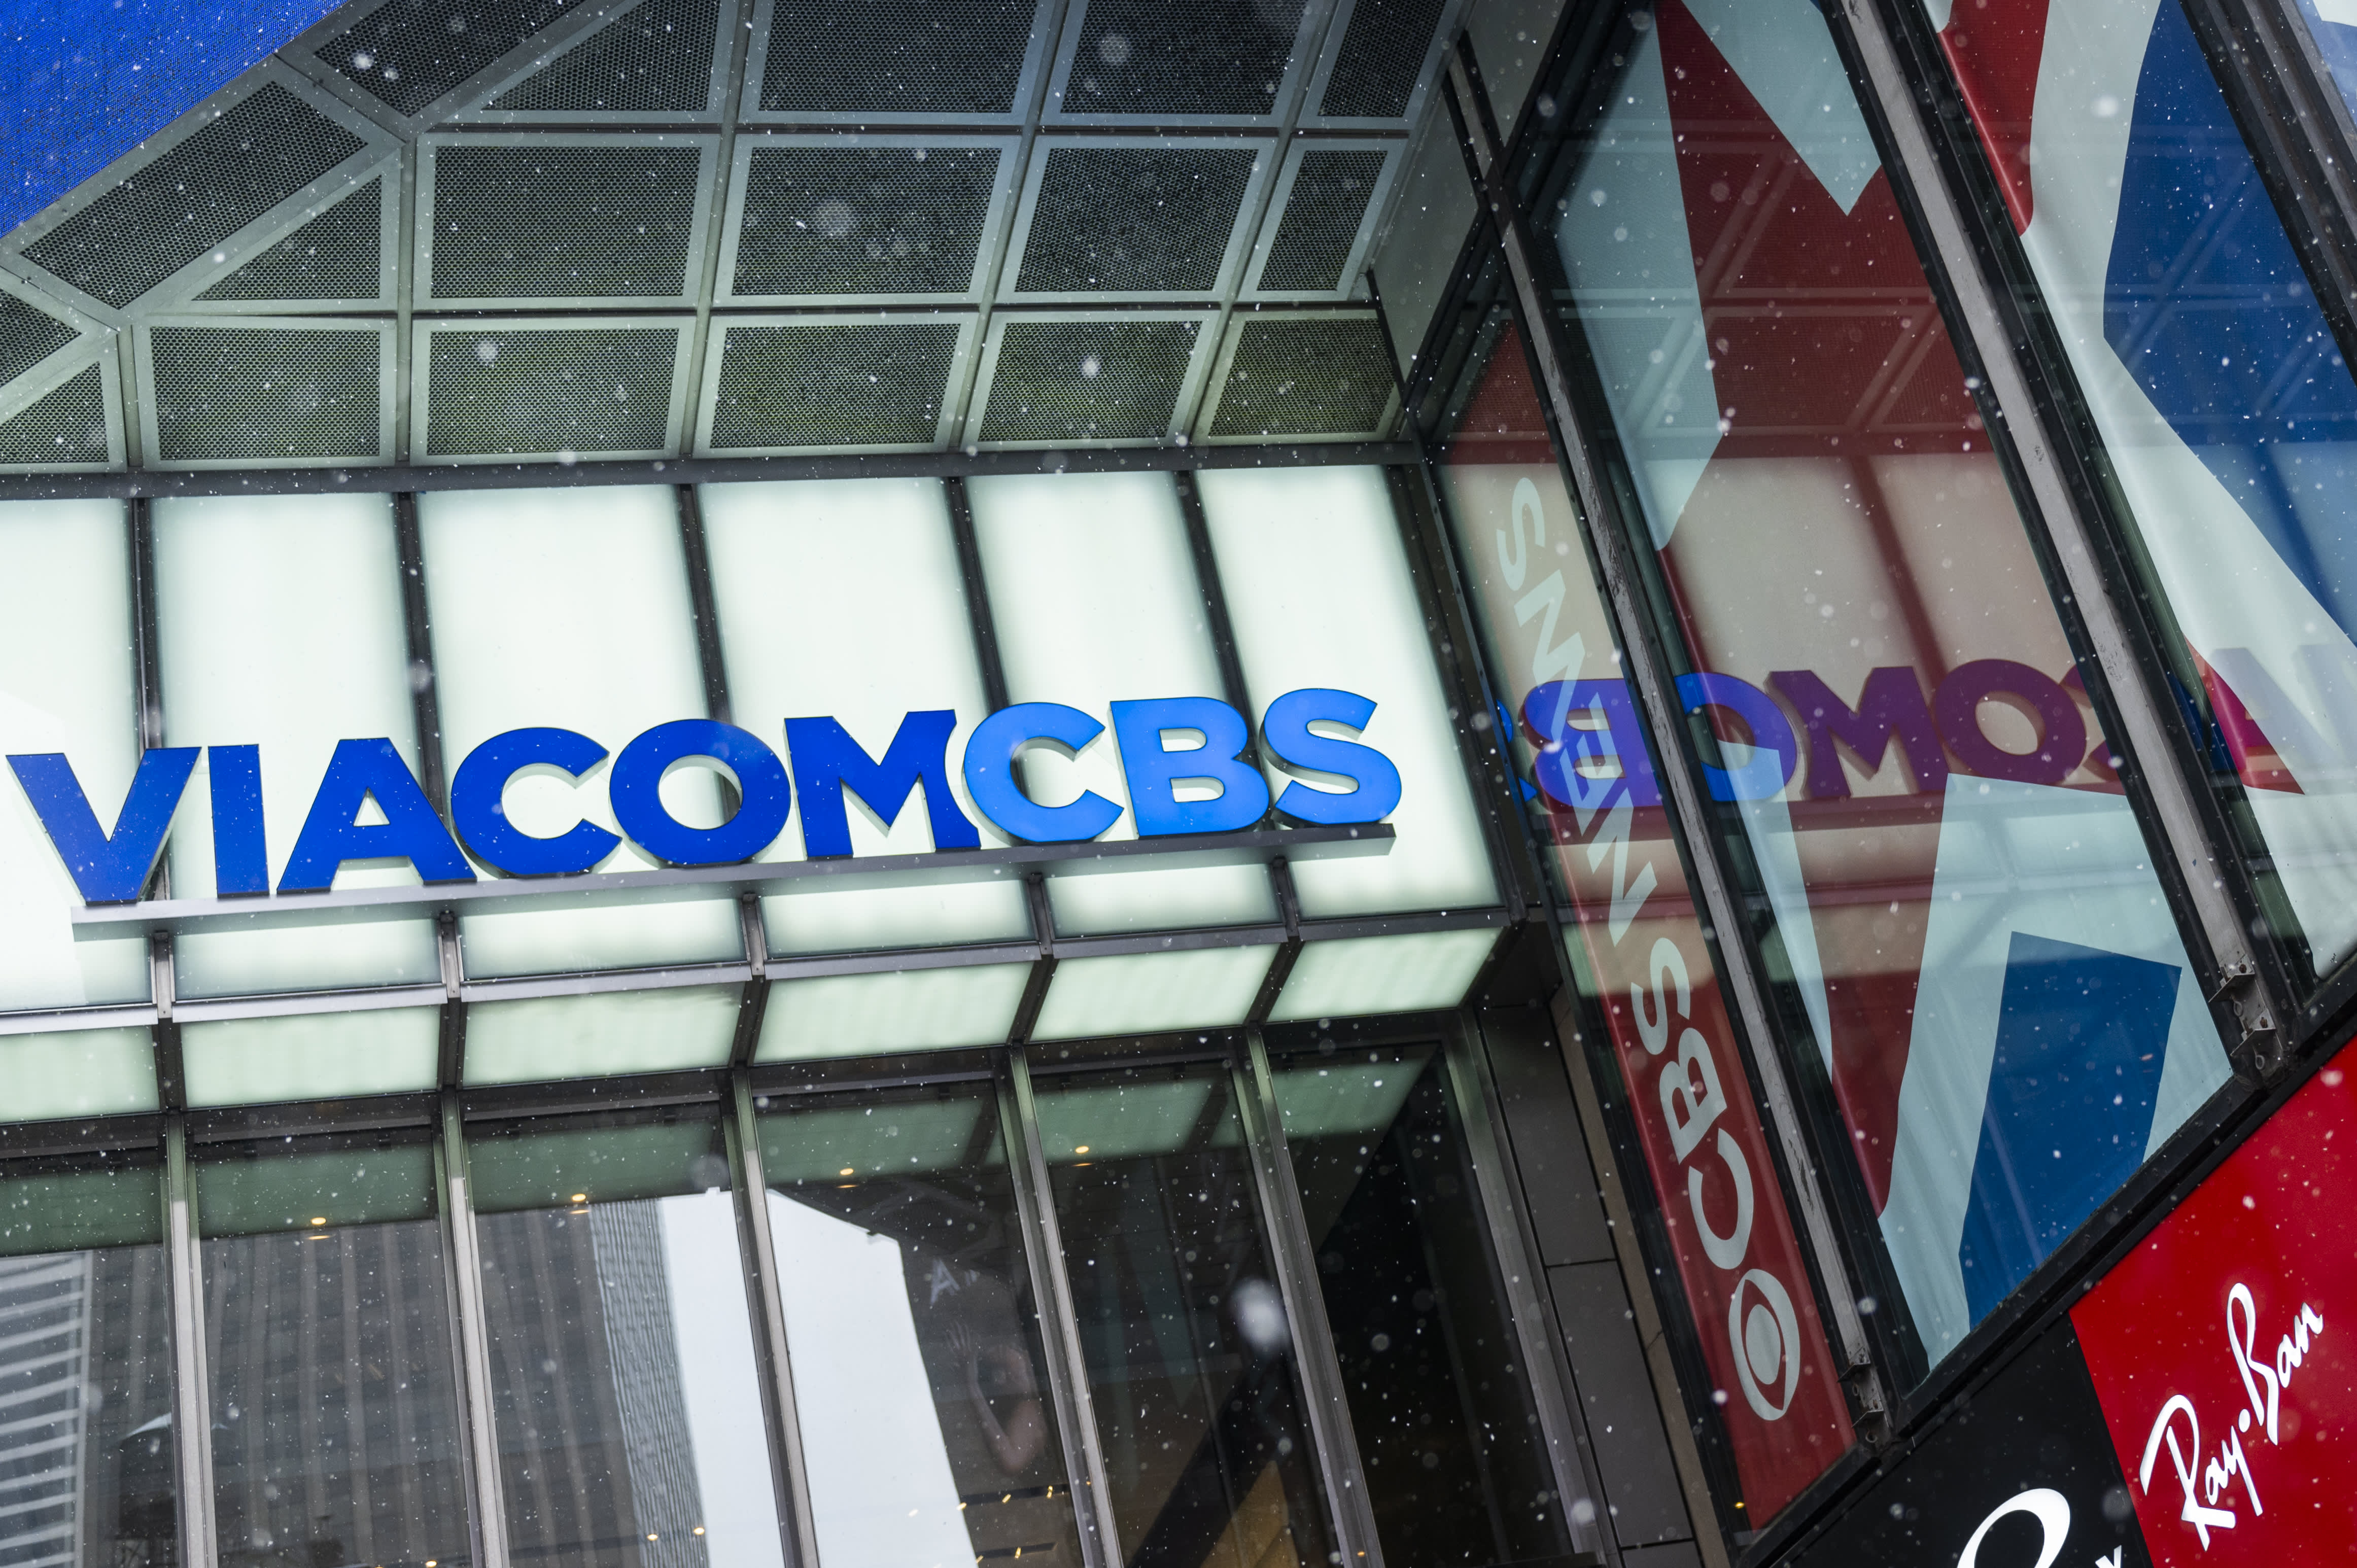 Morgan Stanley and Goldman Sachs’ roles in volatility of ViacomCBS raise questions